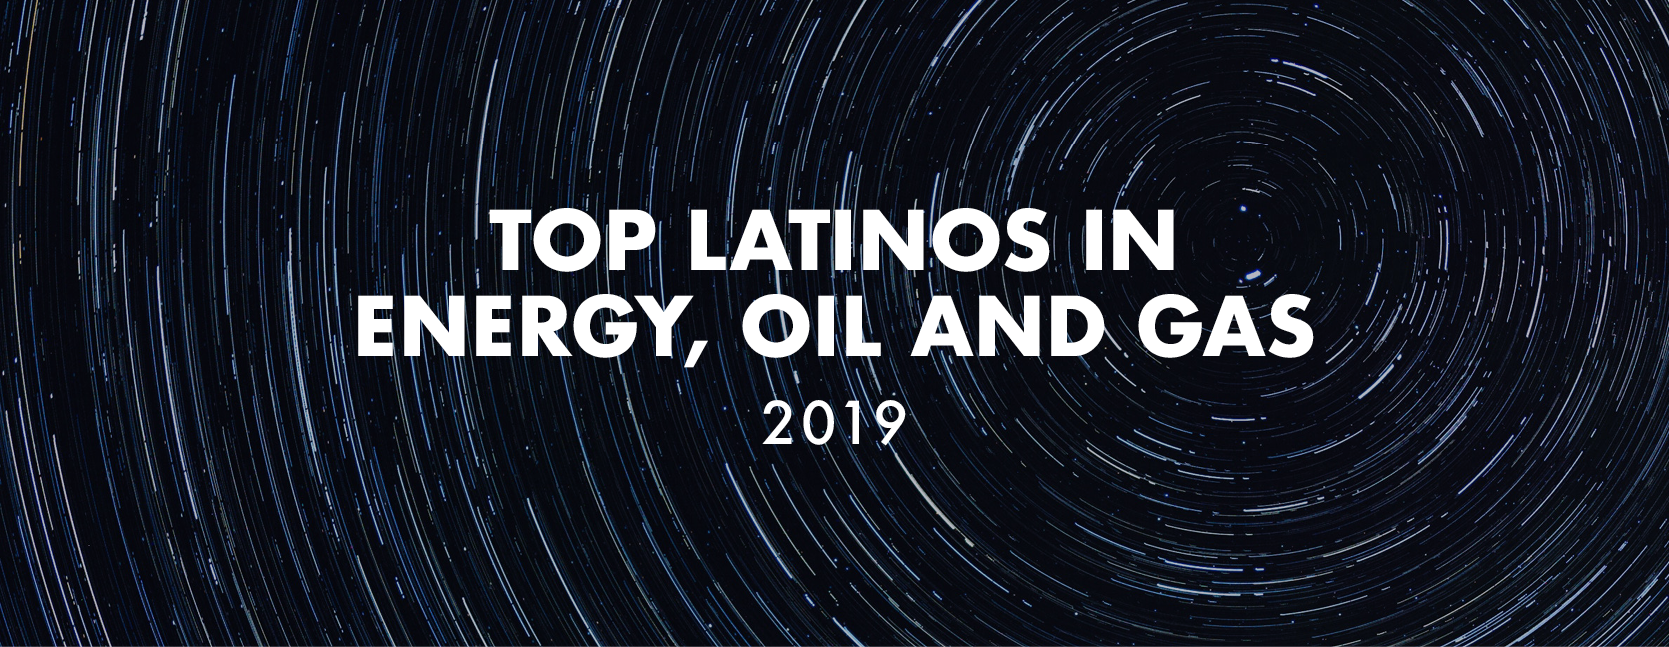 Top Latinos in Energy, Oil and Gas for 2019 — Connecting Leaders Inspiring  the Future